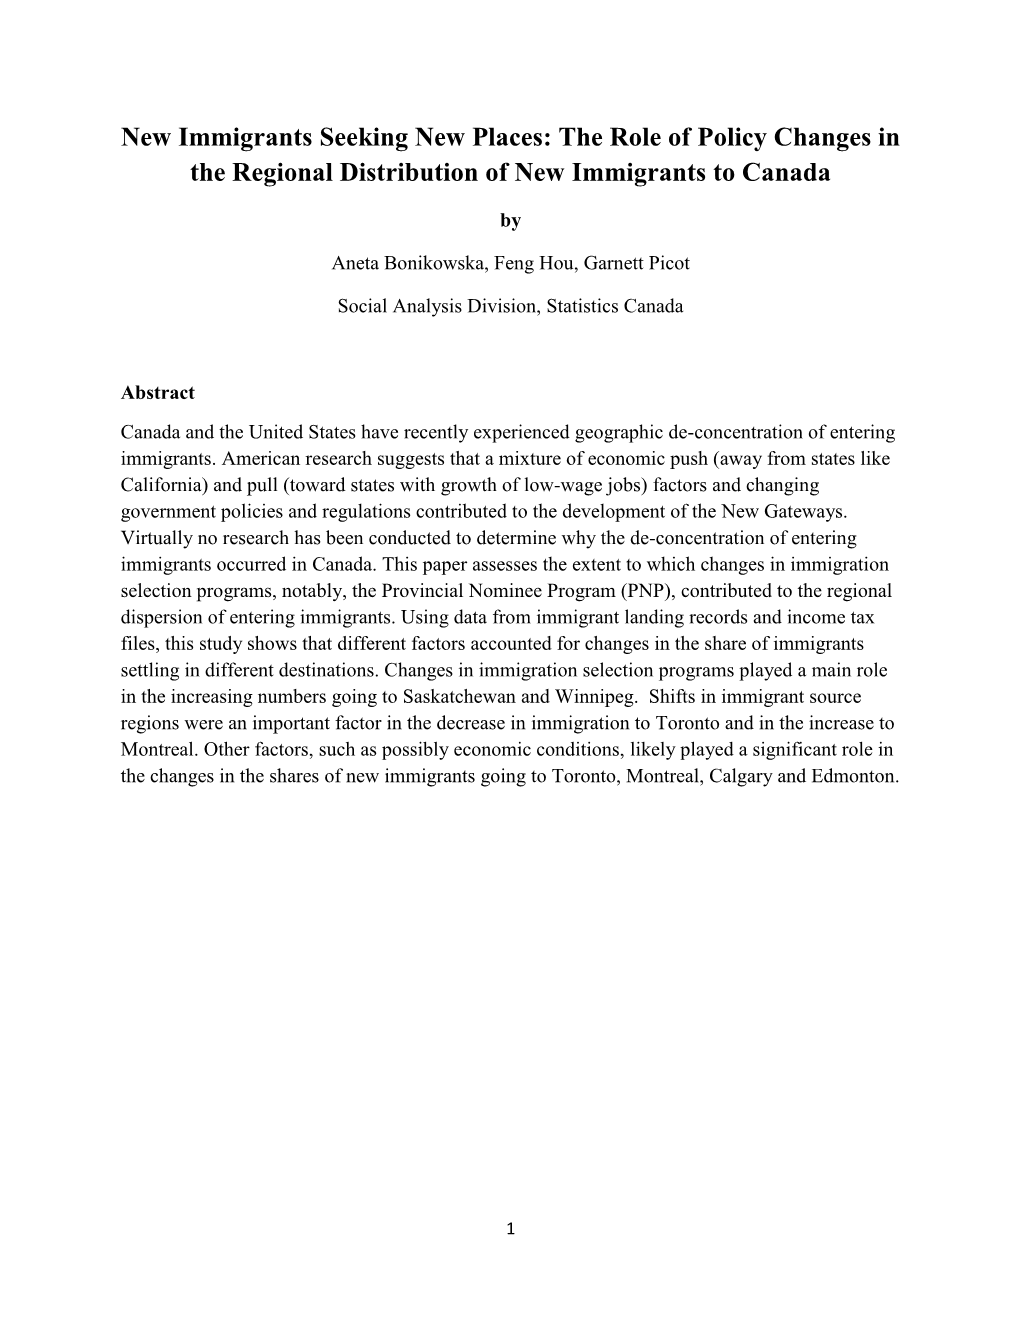 New Immigrants Seeking New Places: the Role of Policy Changes in the Regional Distribution of New Immigrants to Canada